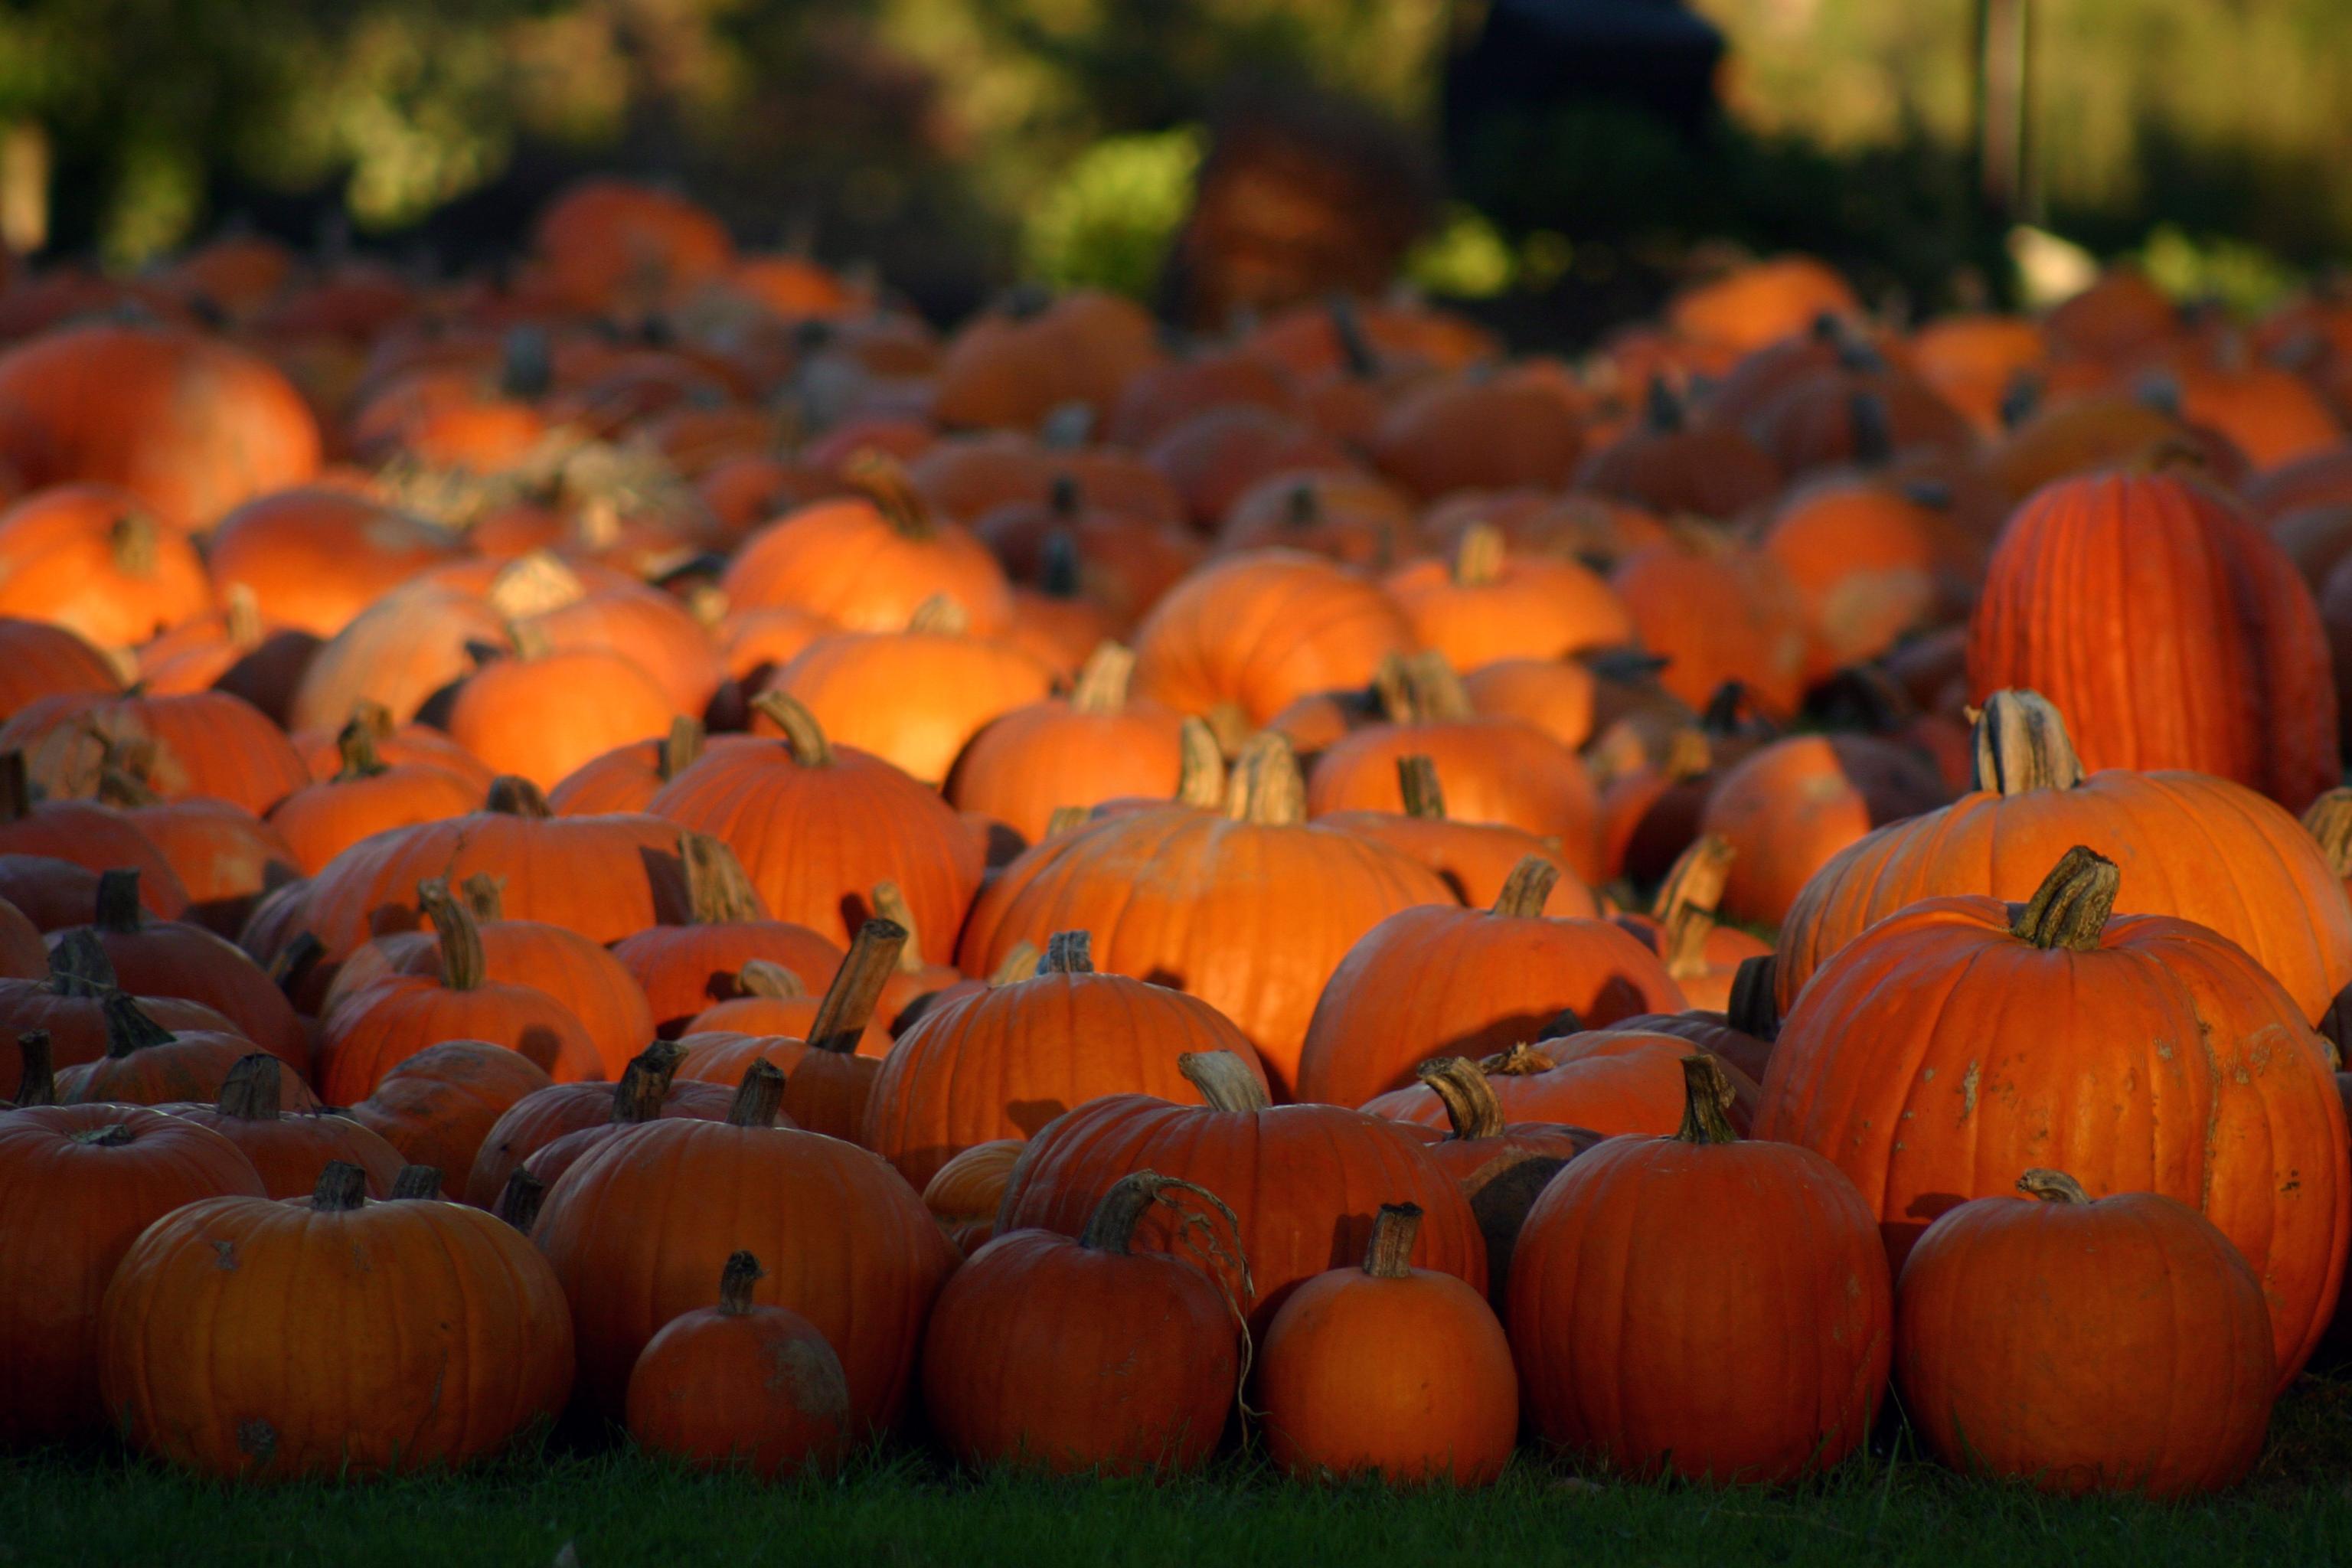 Forget pumpkin spice lattes! Get your pumpkin fix with these